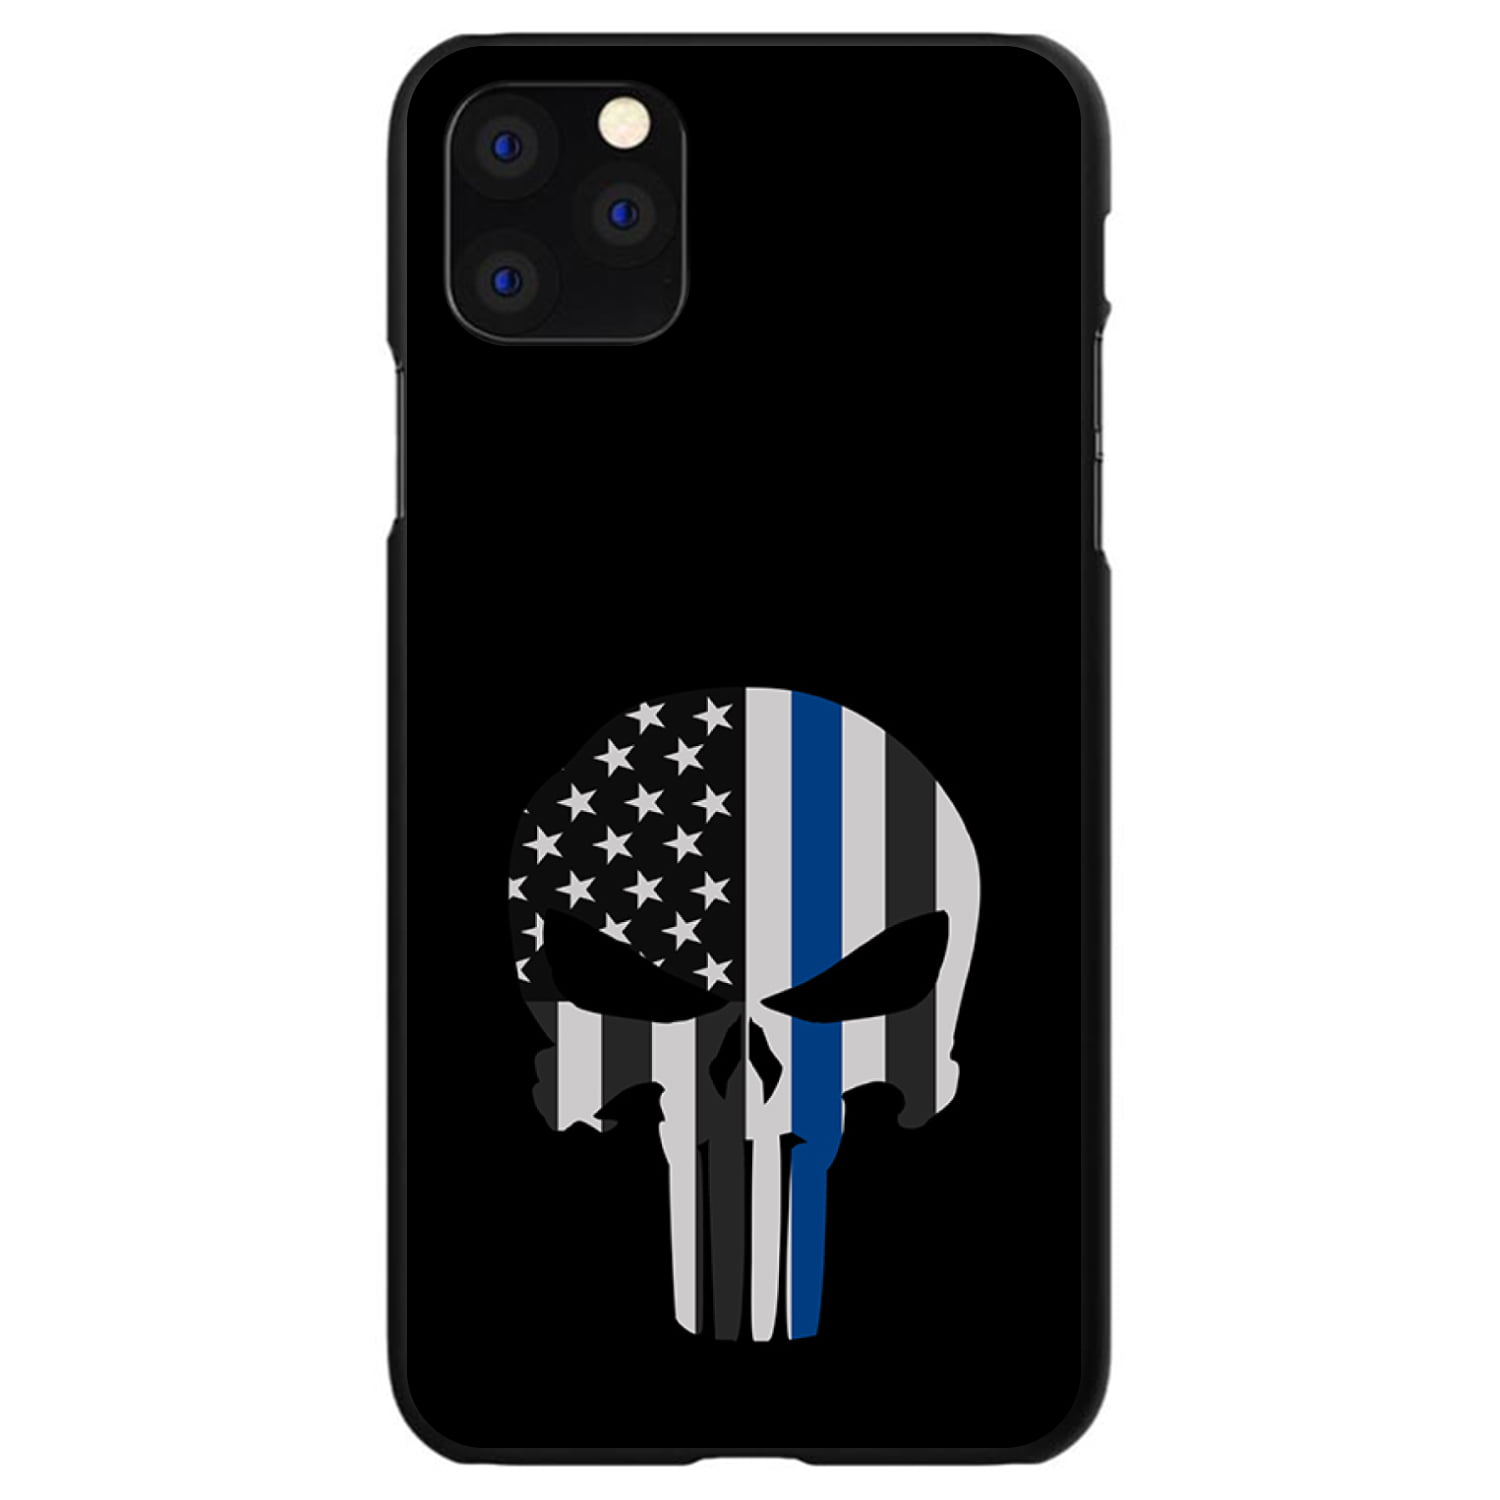 DistinctInk Case for iPhone 12 MINI (5.4" Screen) - Custom Ultra Slim Thin Hard Black Plastic Cover - Thin Blue Line Skull - Support for First Responders